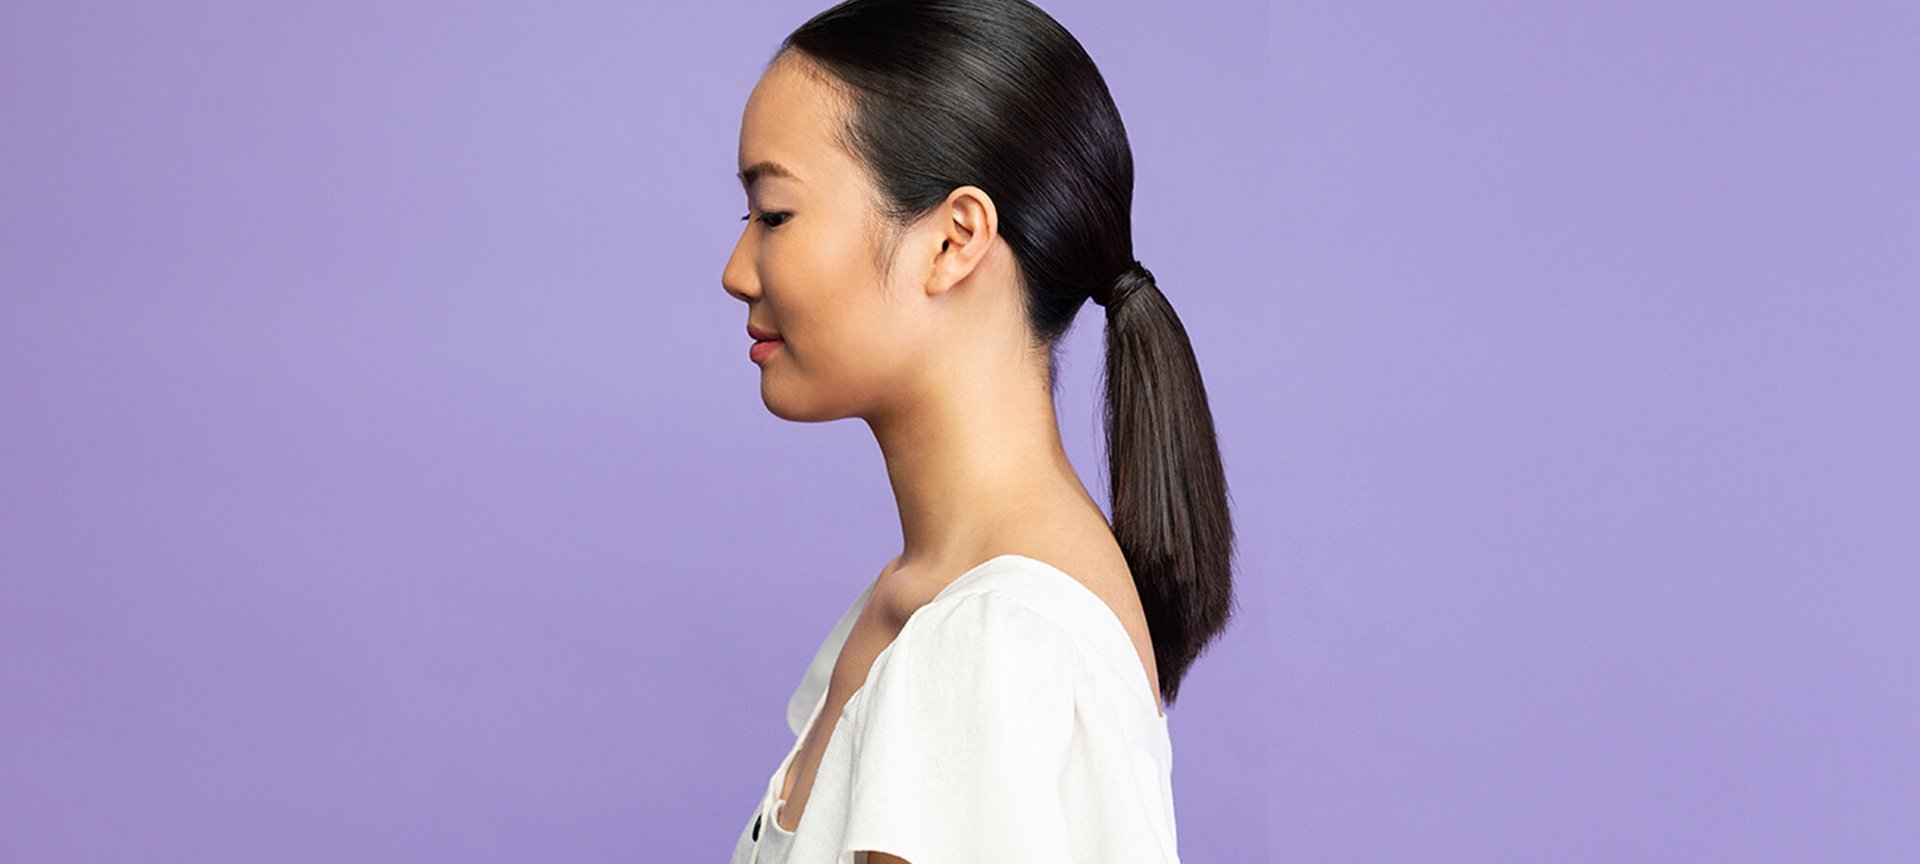 A Photo Gallery of Hairstyles Flattering on Asian Women